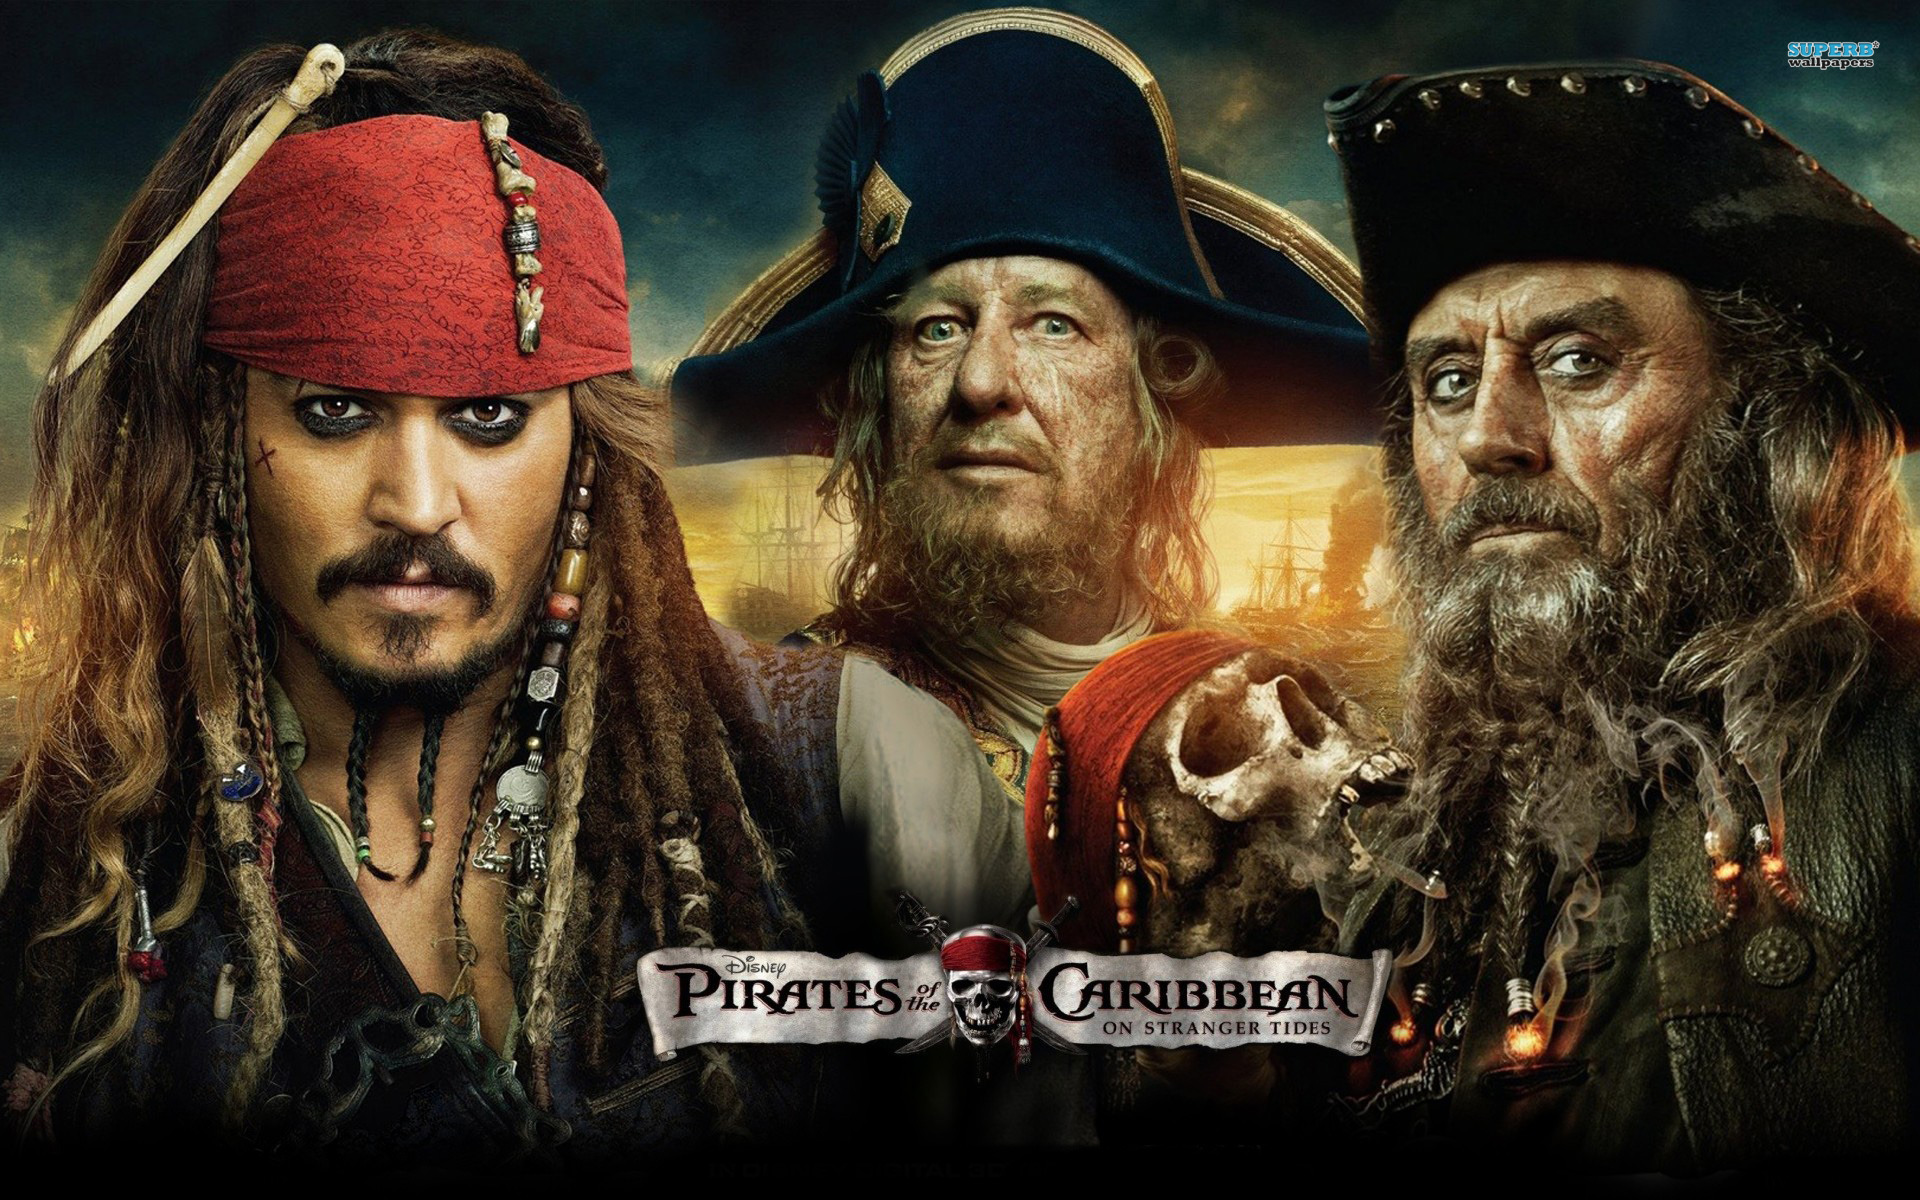 Pirates Of The Caribbean Backgrounds, Compatible - PC, Mobile, Gadgets| 1920x1200 px